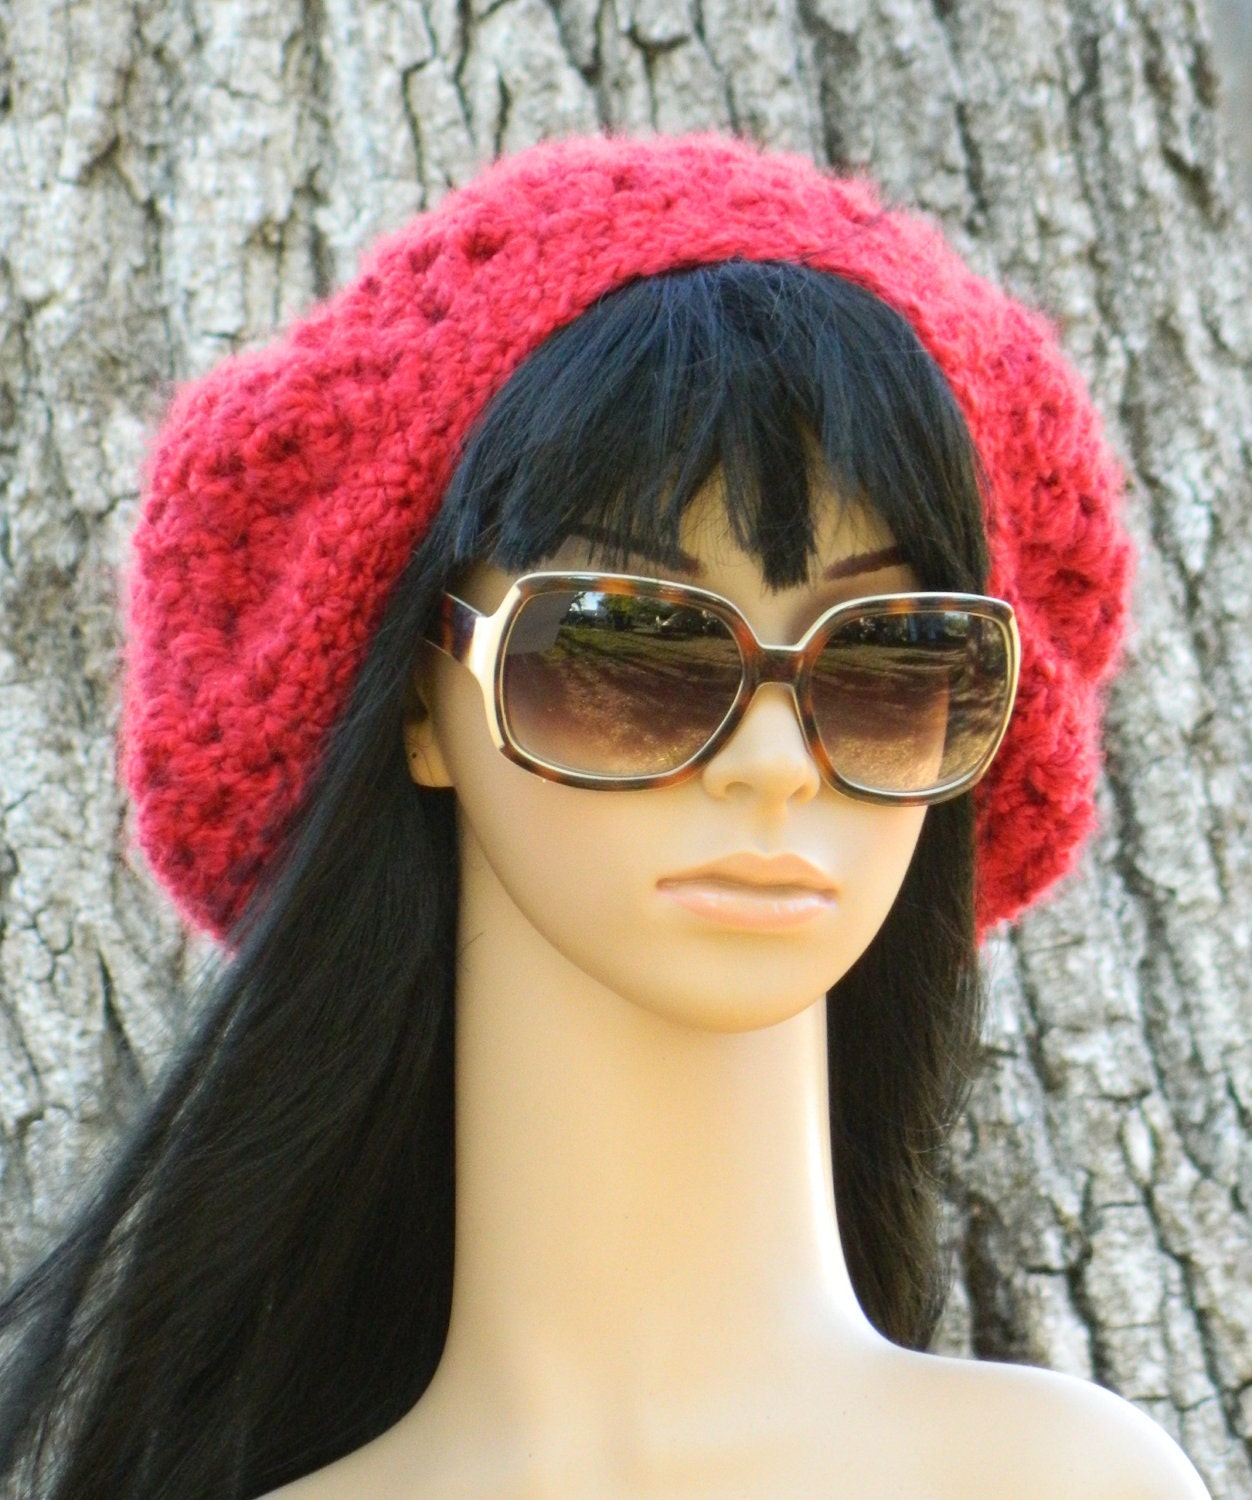 Beret  Slouchy Boho Winter Fashion Stylish Tam  For Women And Teens In Red